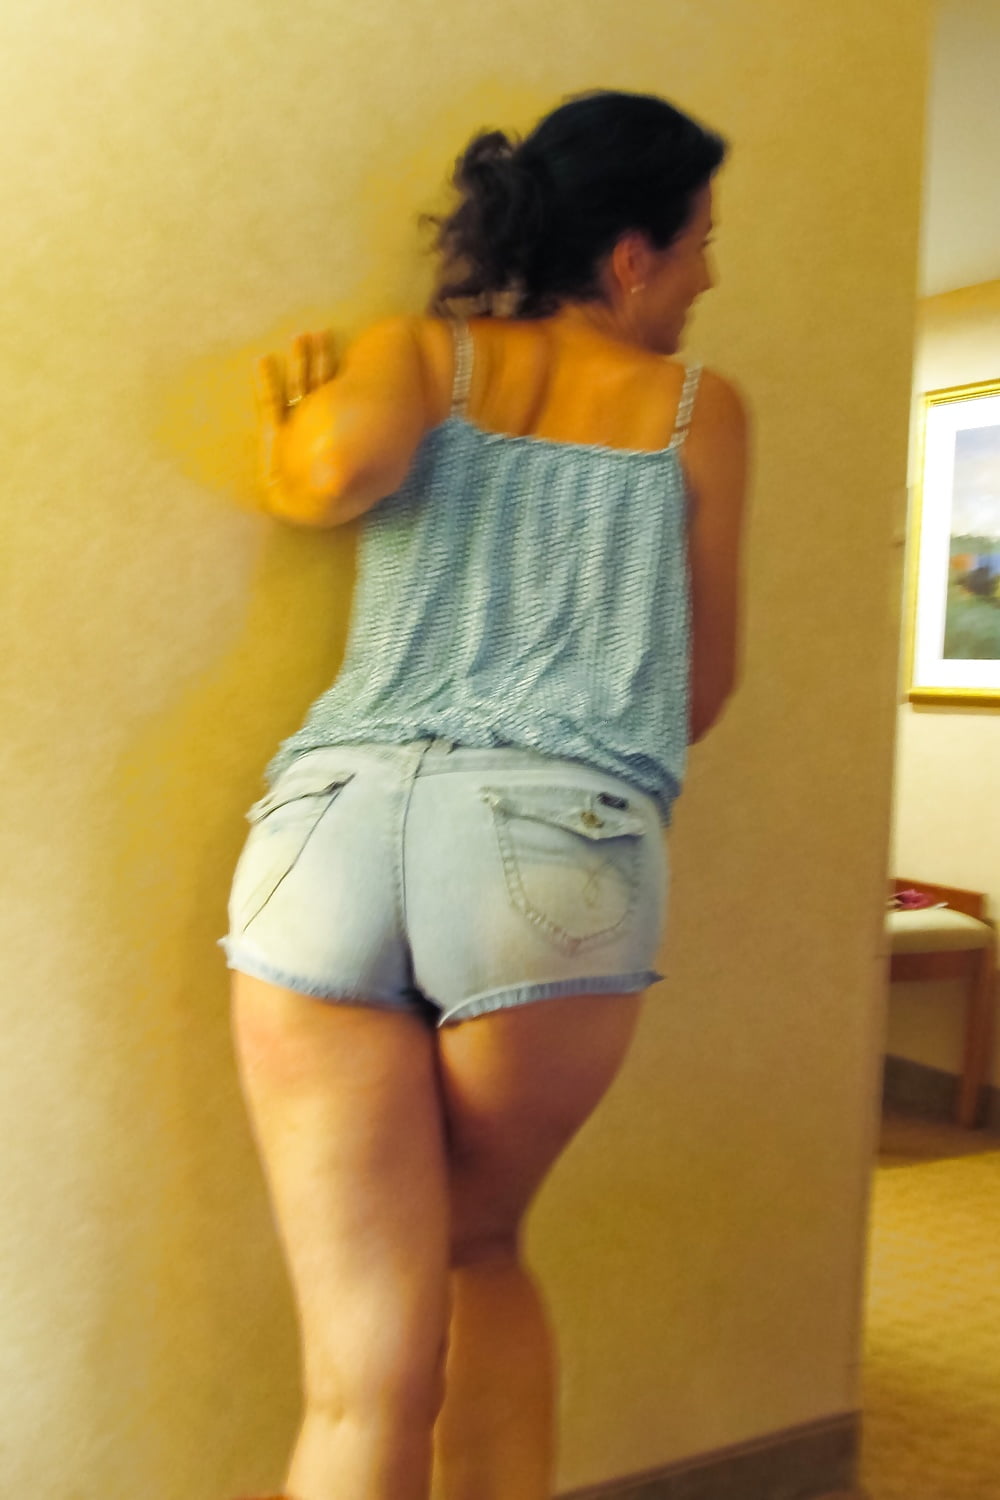 Mature wife exposed ass & tits in hotel room (8/16)